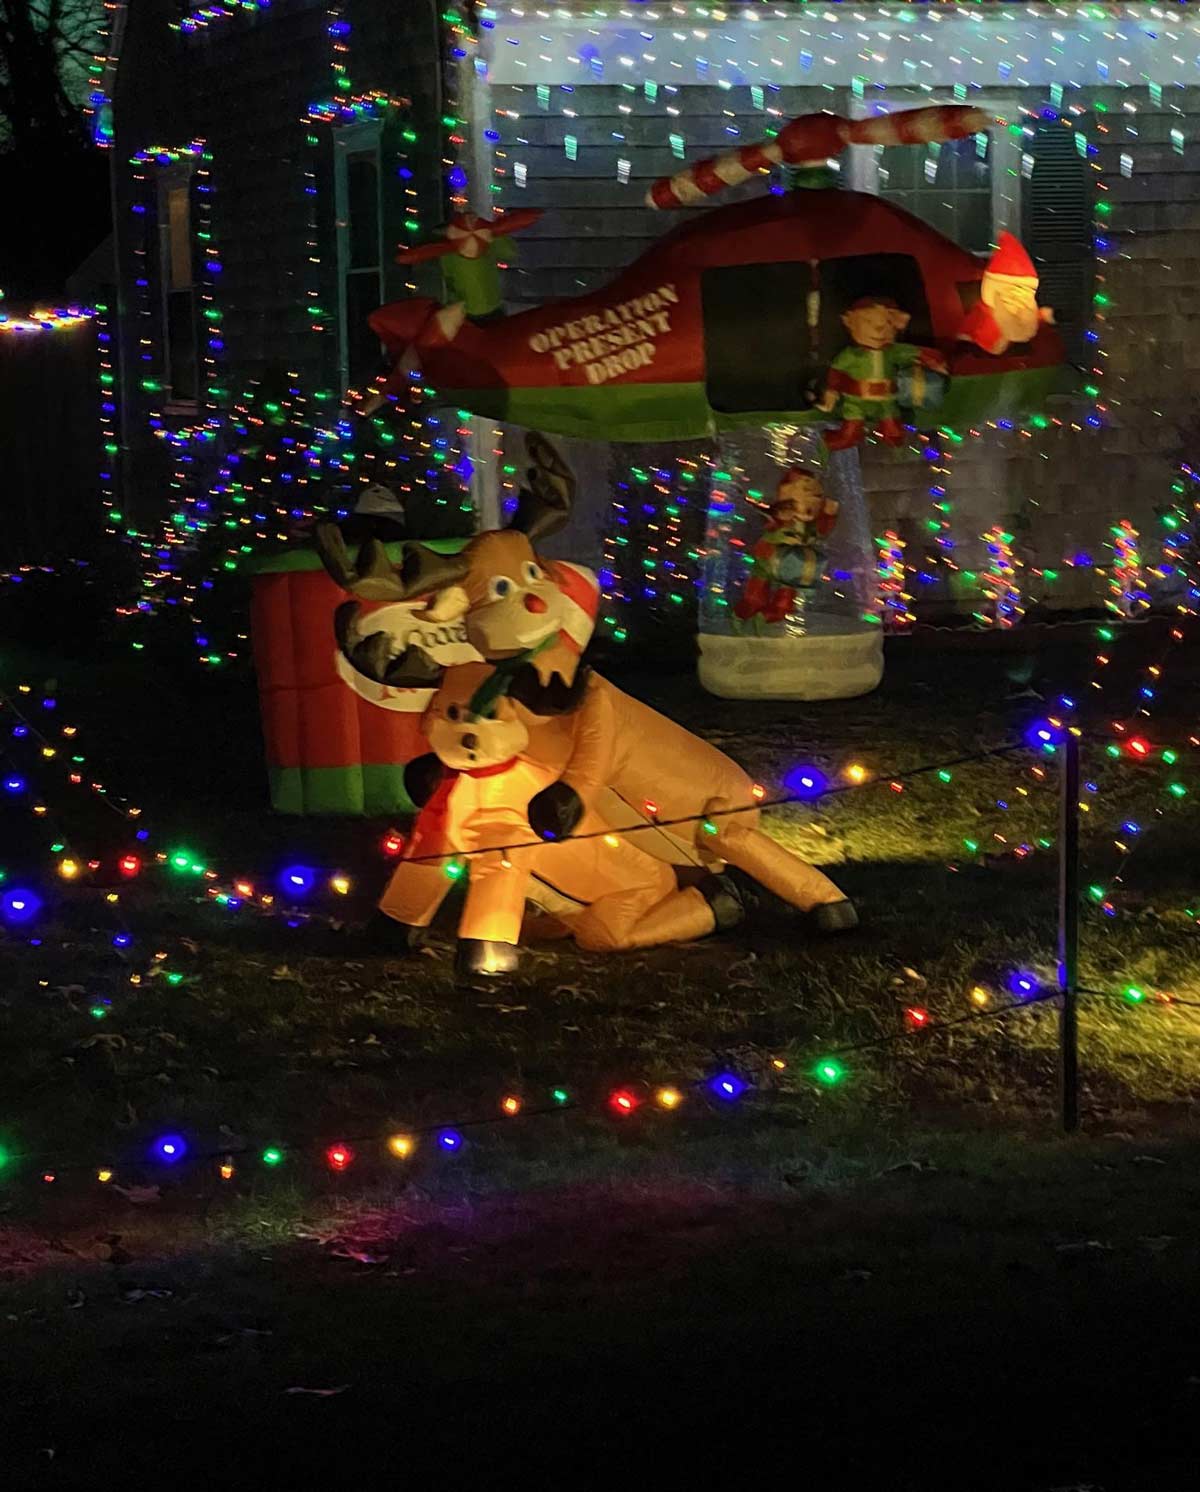 Neighbors keeping it classy for Christmas